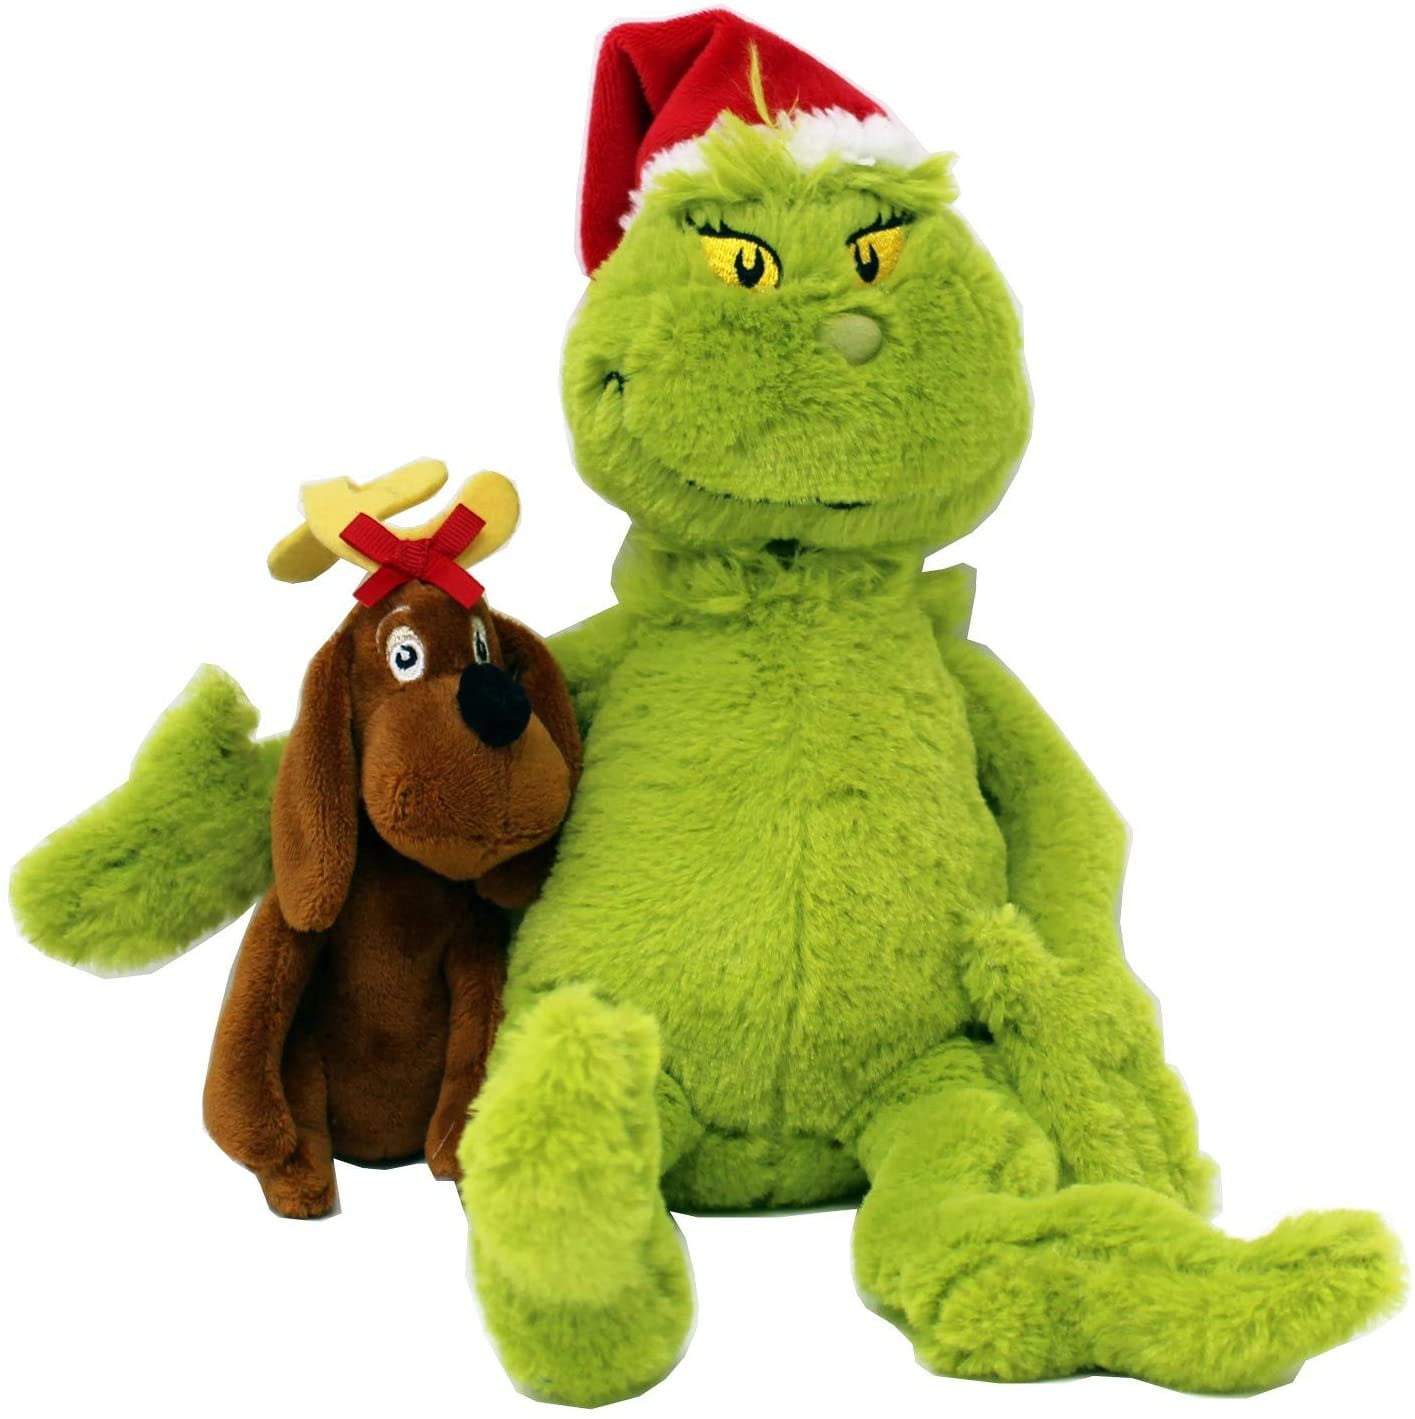 max stuffed animal from the grinch